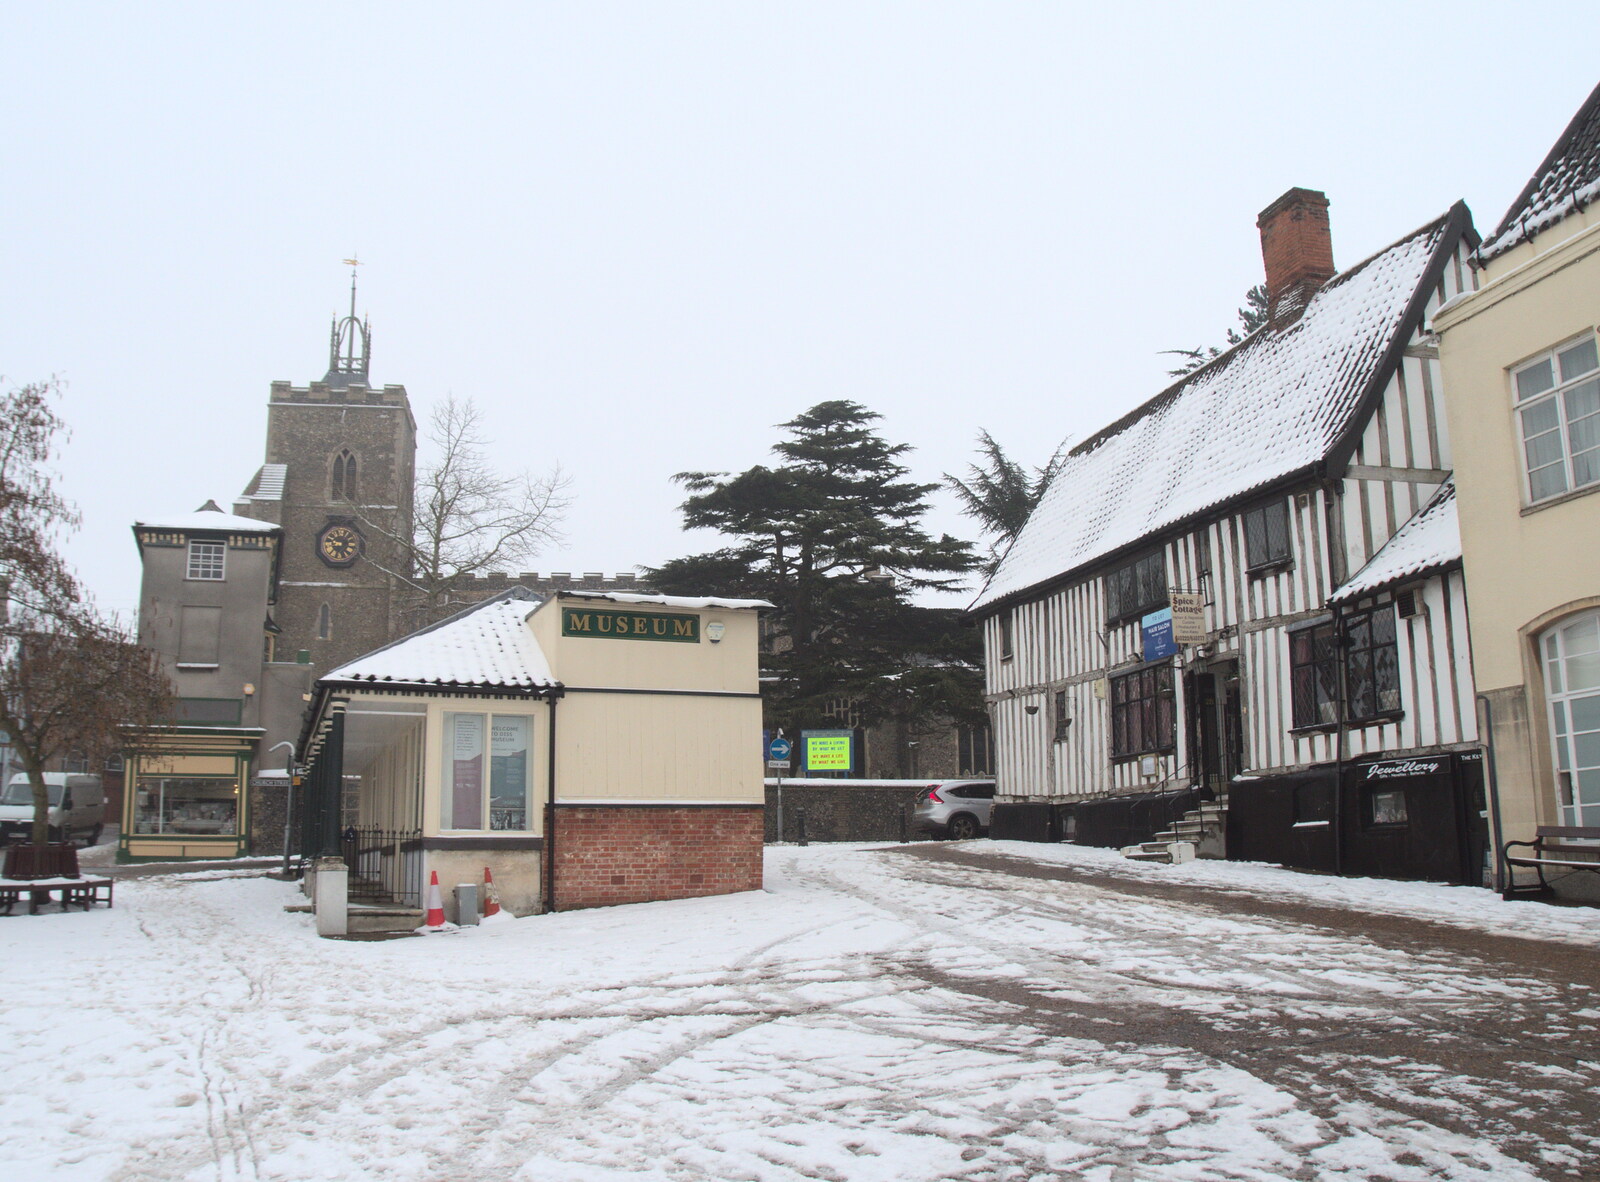 The Diss Museum from More March Snow and a Postcard from Diss, Norfolk - 3rd March 2018